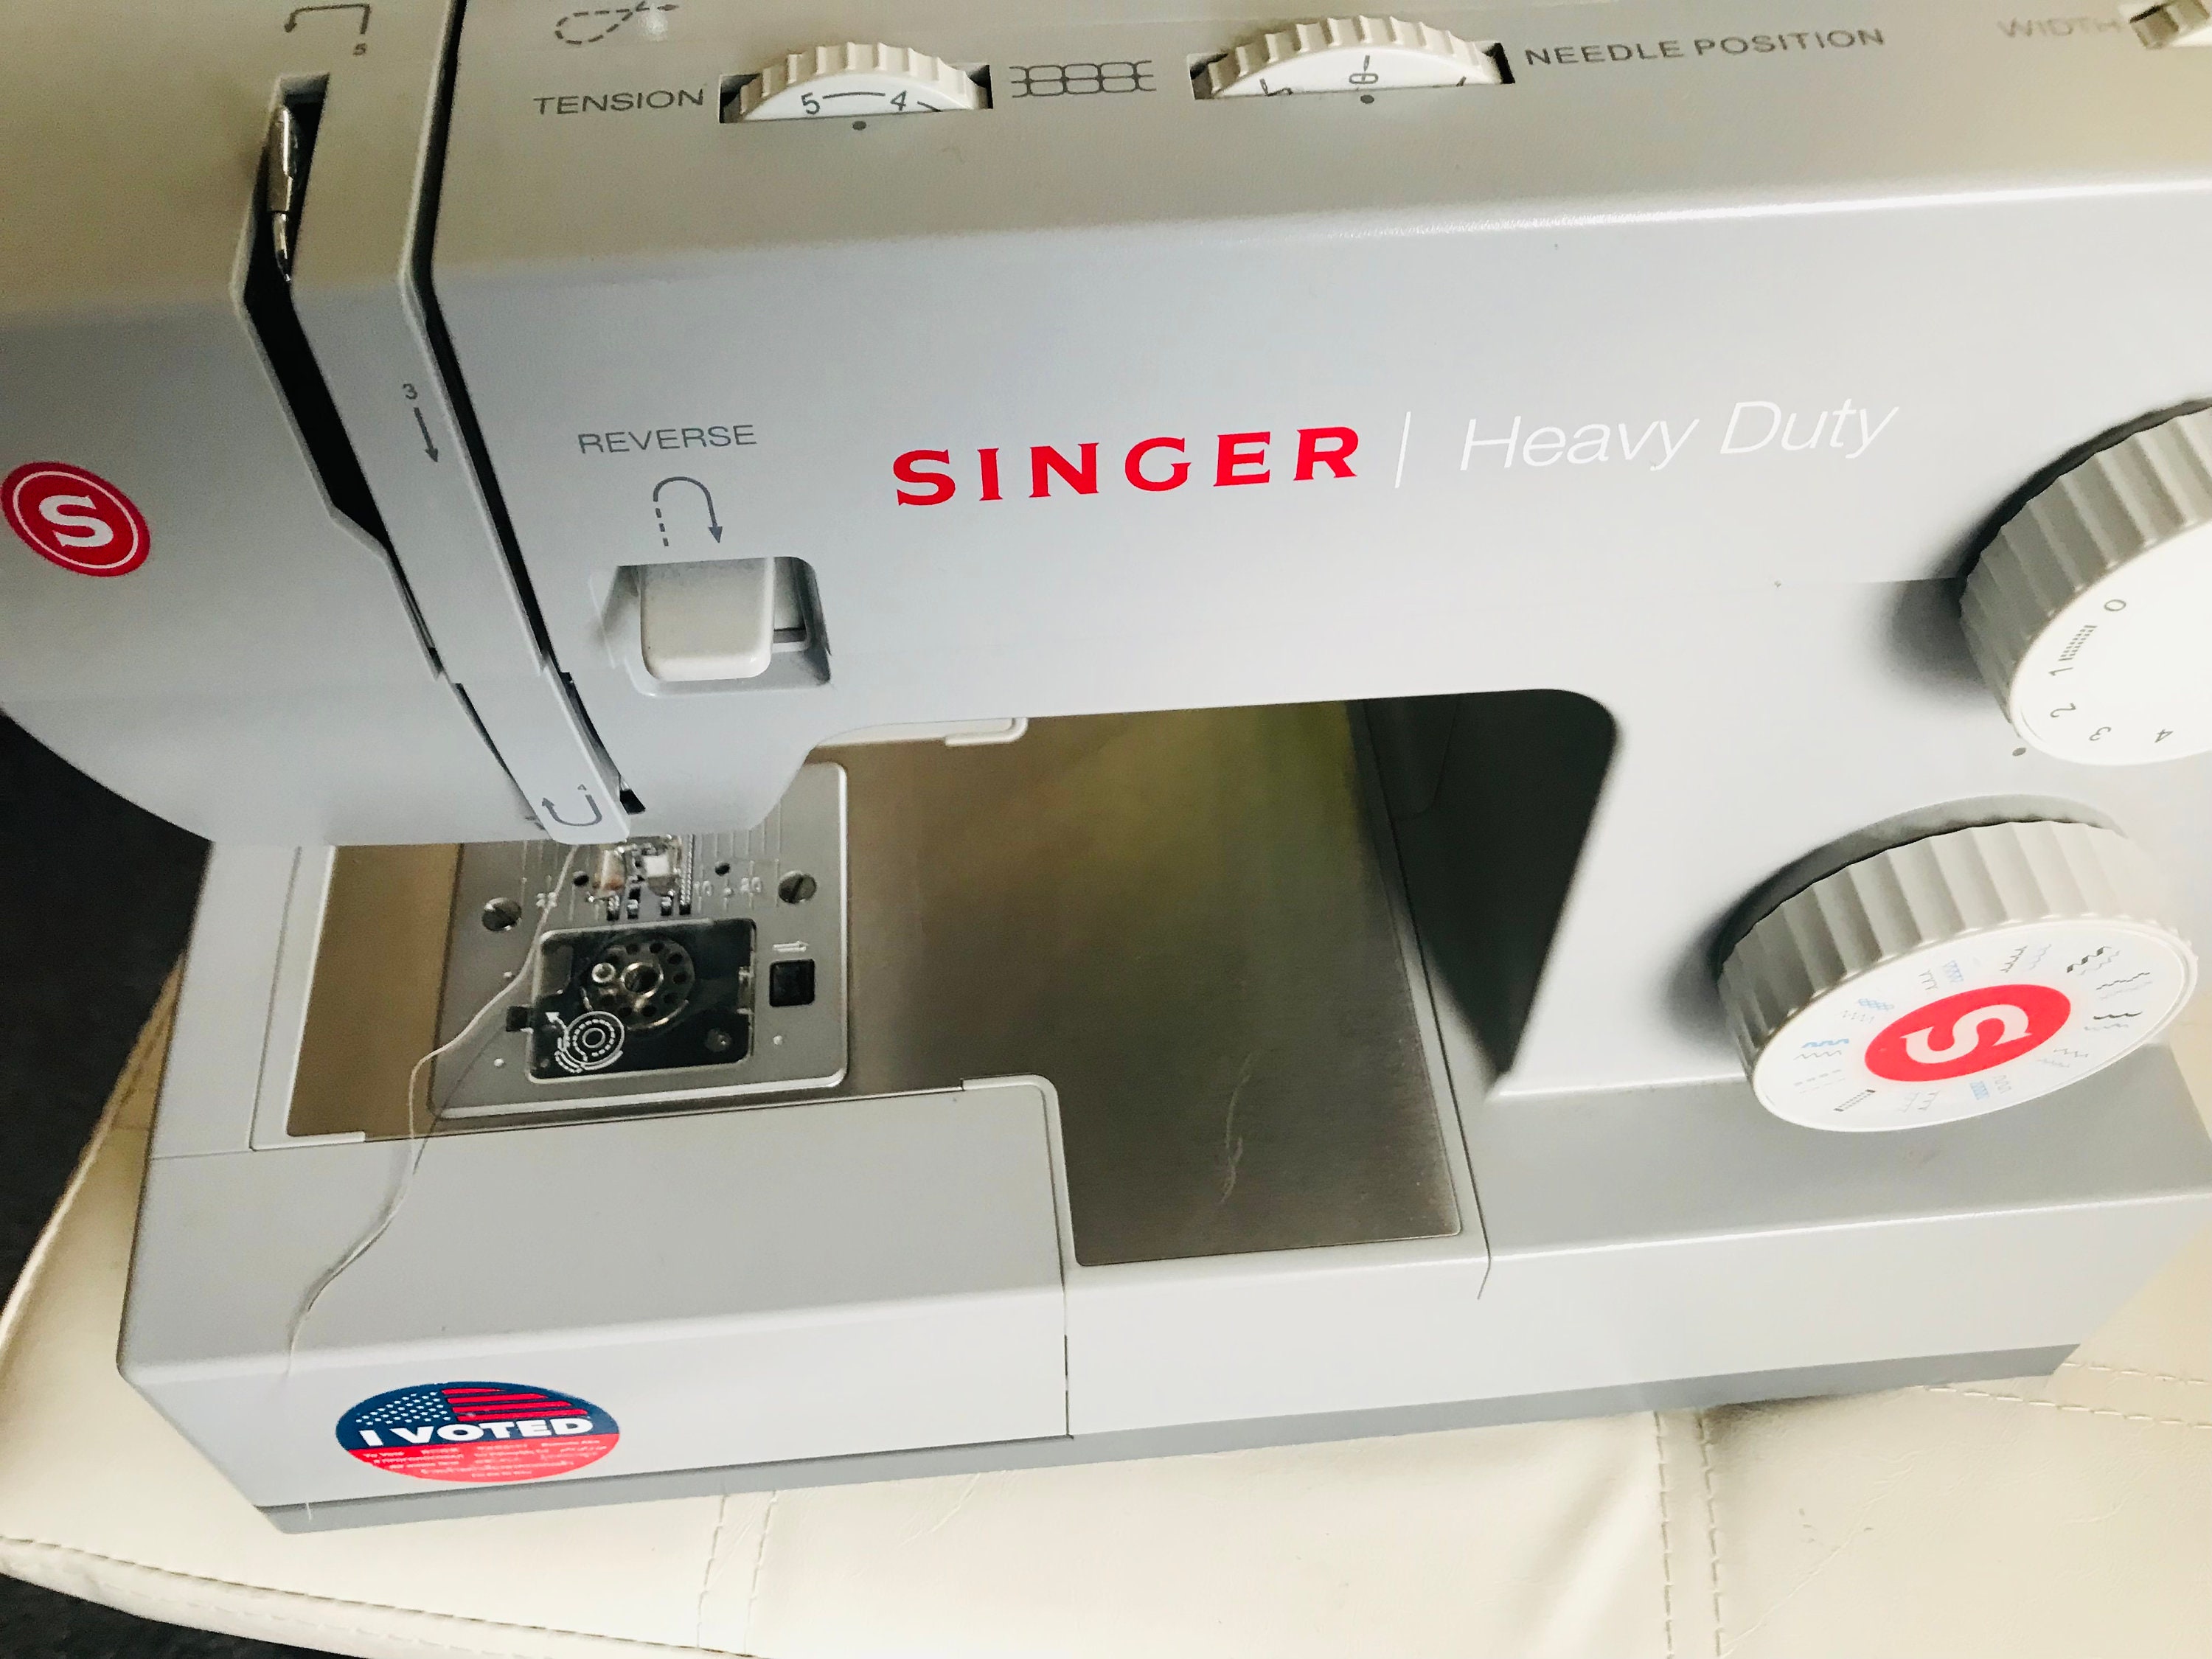 NEW Best Price SINGER Heavy Duty 4423 Sewing Machine With 23 Built